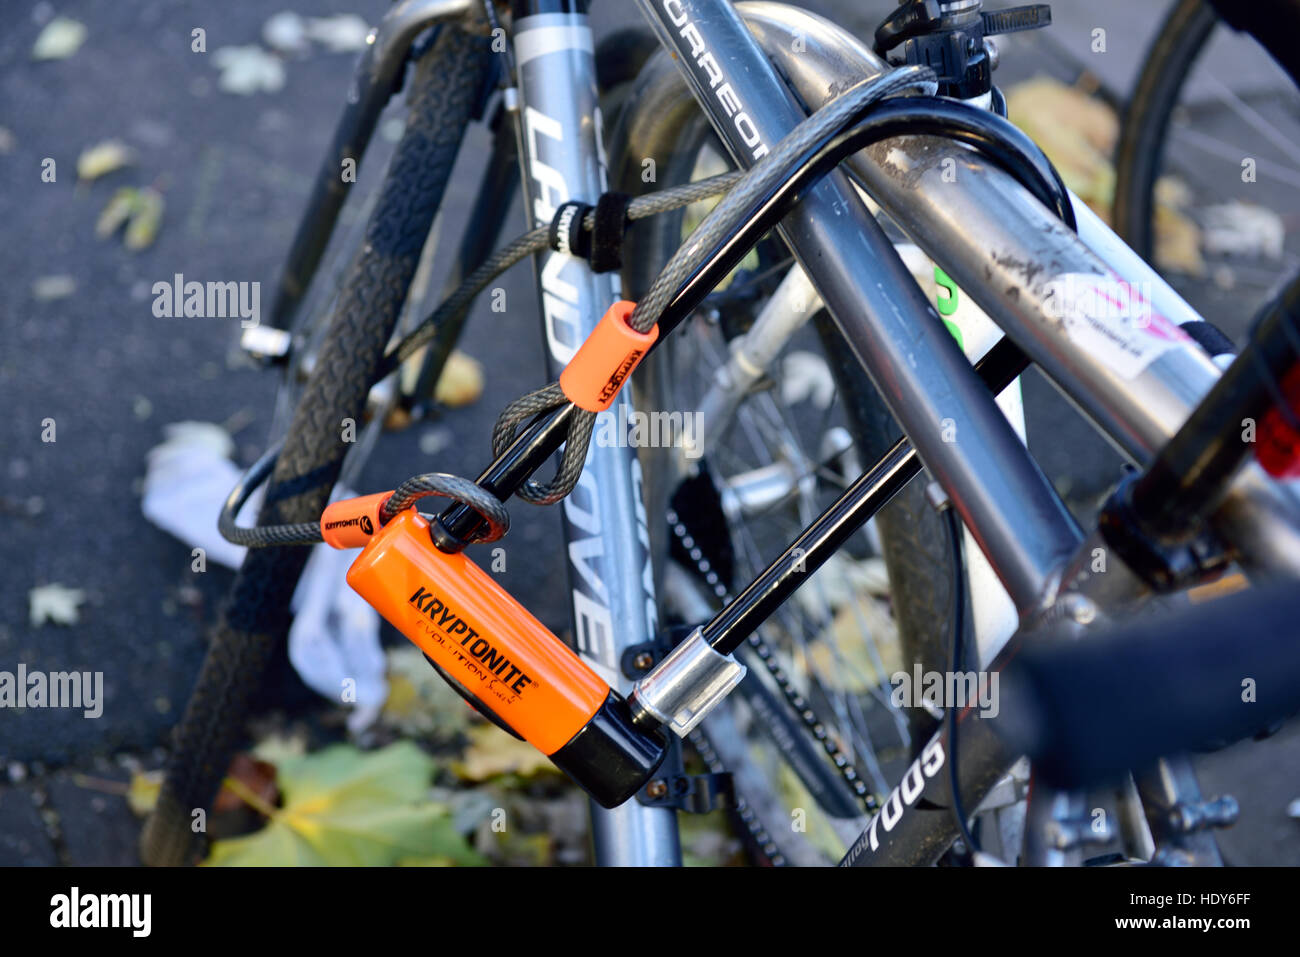 Bicycle locked to rack with “D Kryptonite” and cabal bike lock, UK Stock Photo